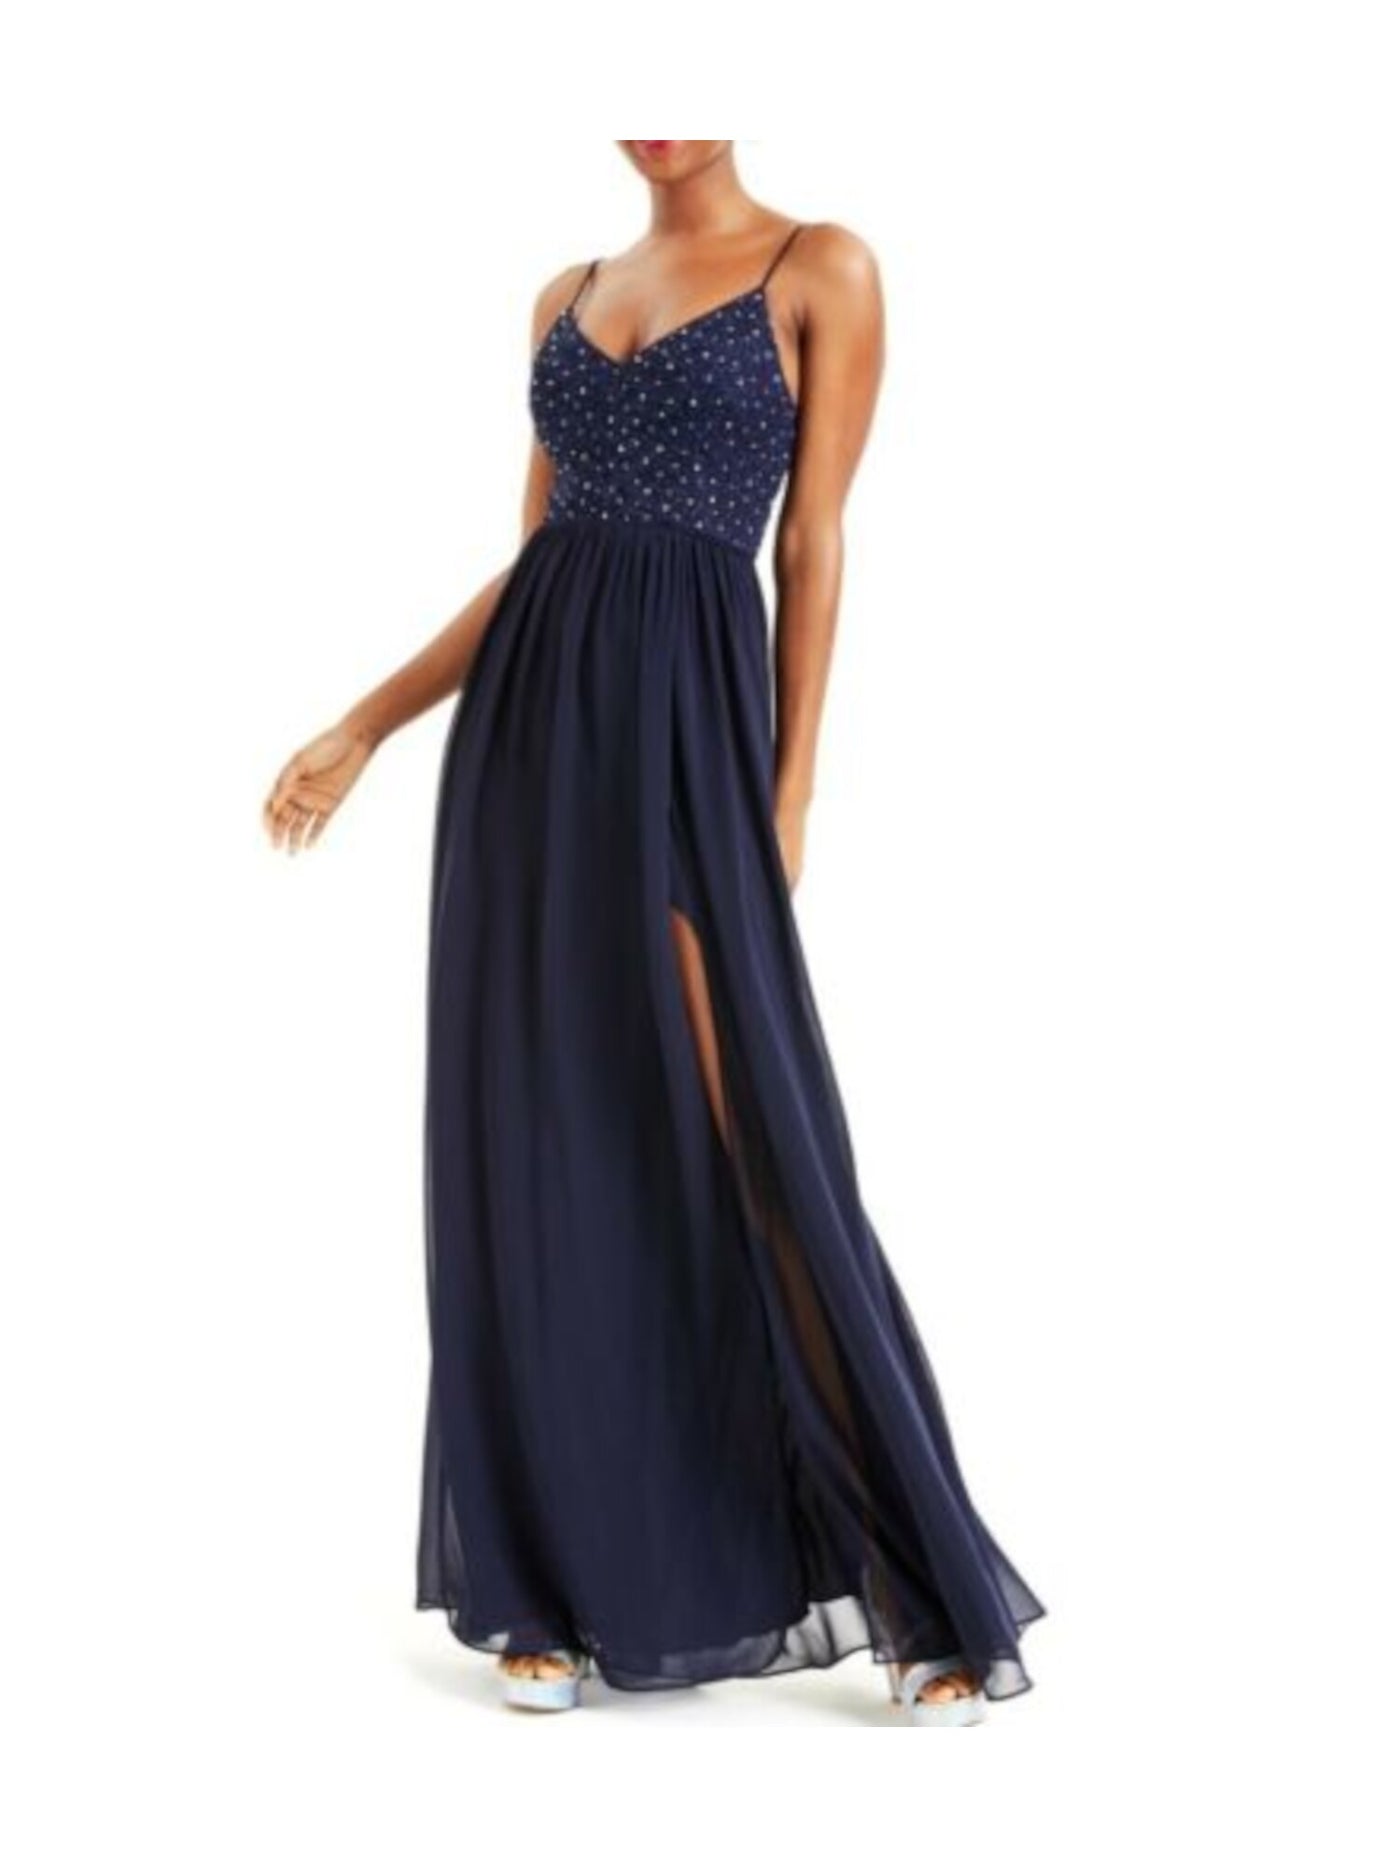 CITY STUDIO Womens Navy Embellished Zippered Pleated Slitted Sheer Lined Spaghetti Strap V Neck Full-Length  Gown Prom Dress Juniors 1